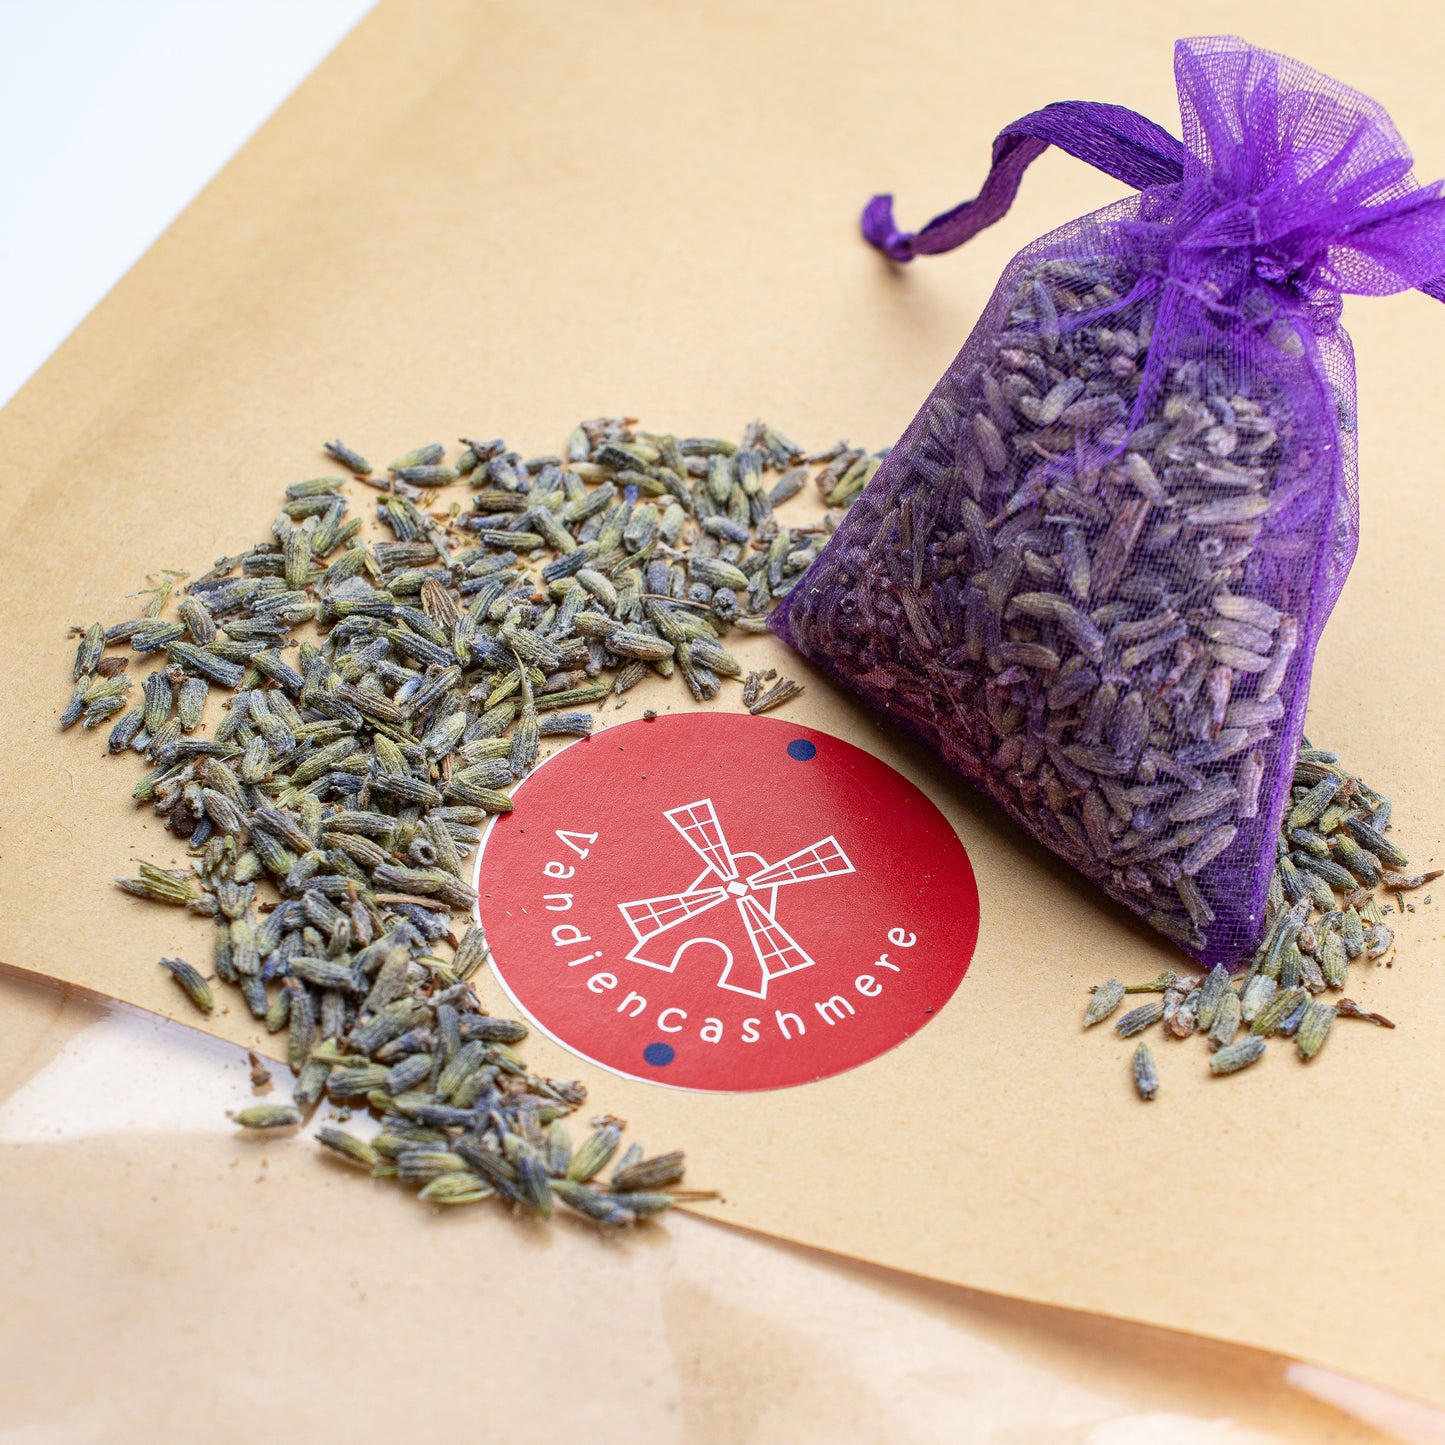 Lavender scented sachets, dark purple 10 x 3 grams. NOW €3.50 DISCOUNT at checkout!!